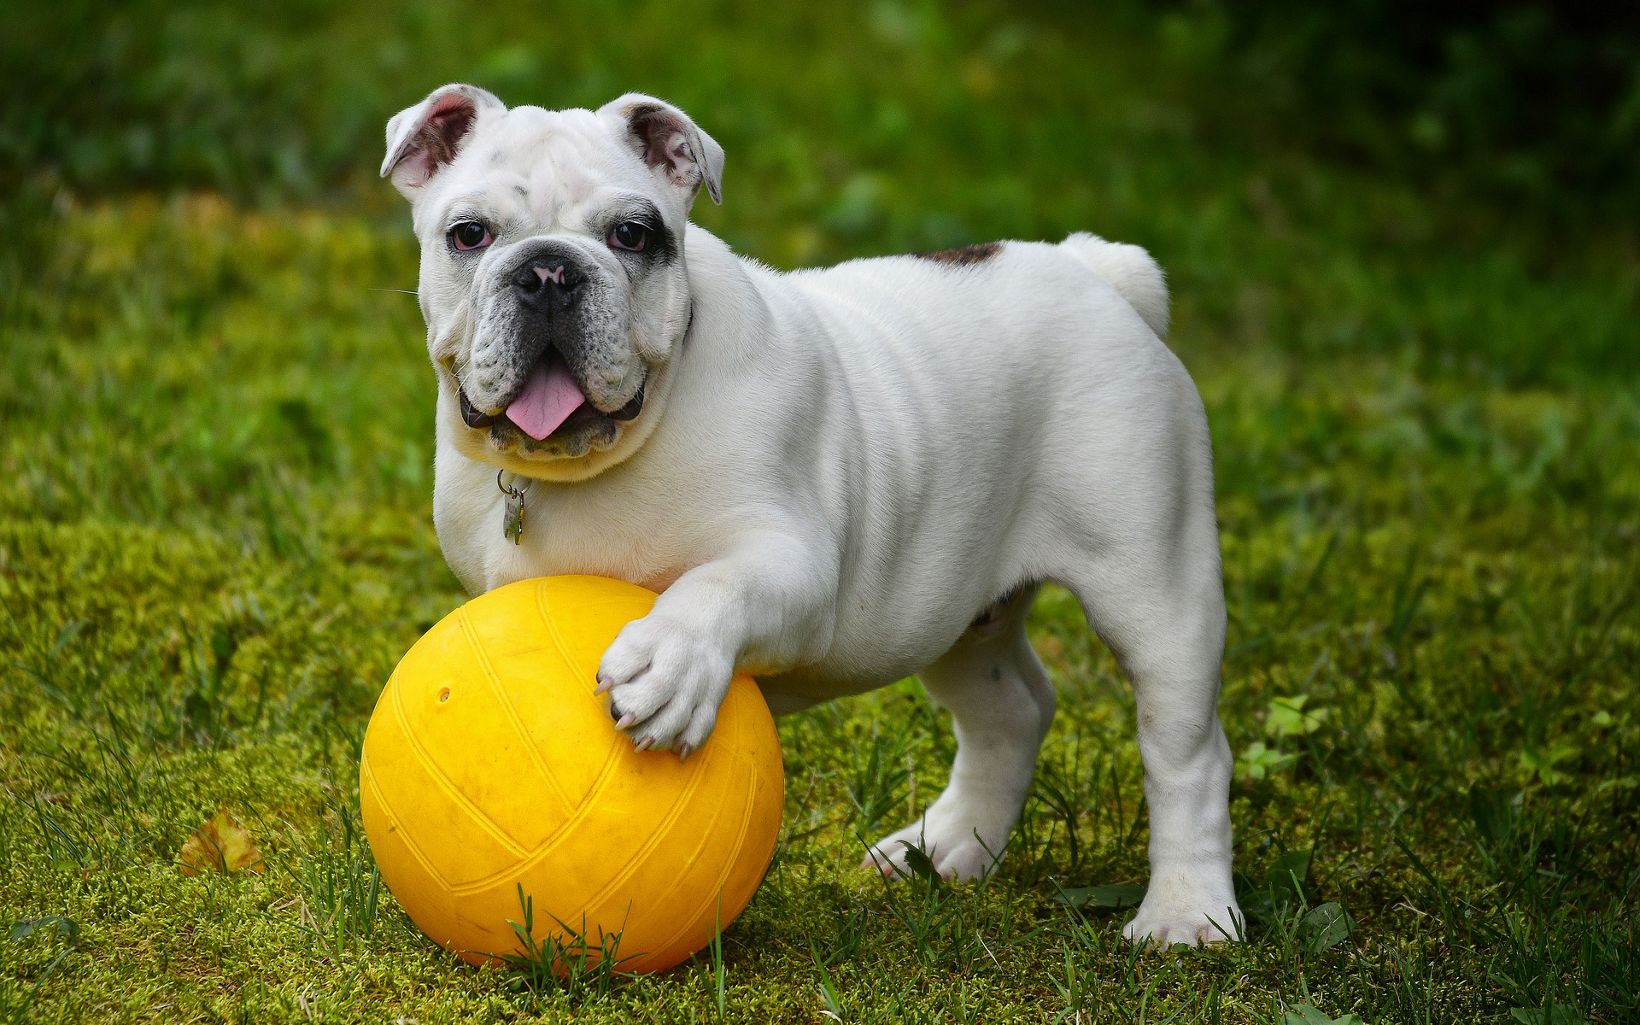 A bulldog stands on the grass with a paw on a yellow volleyball.